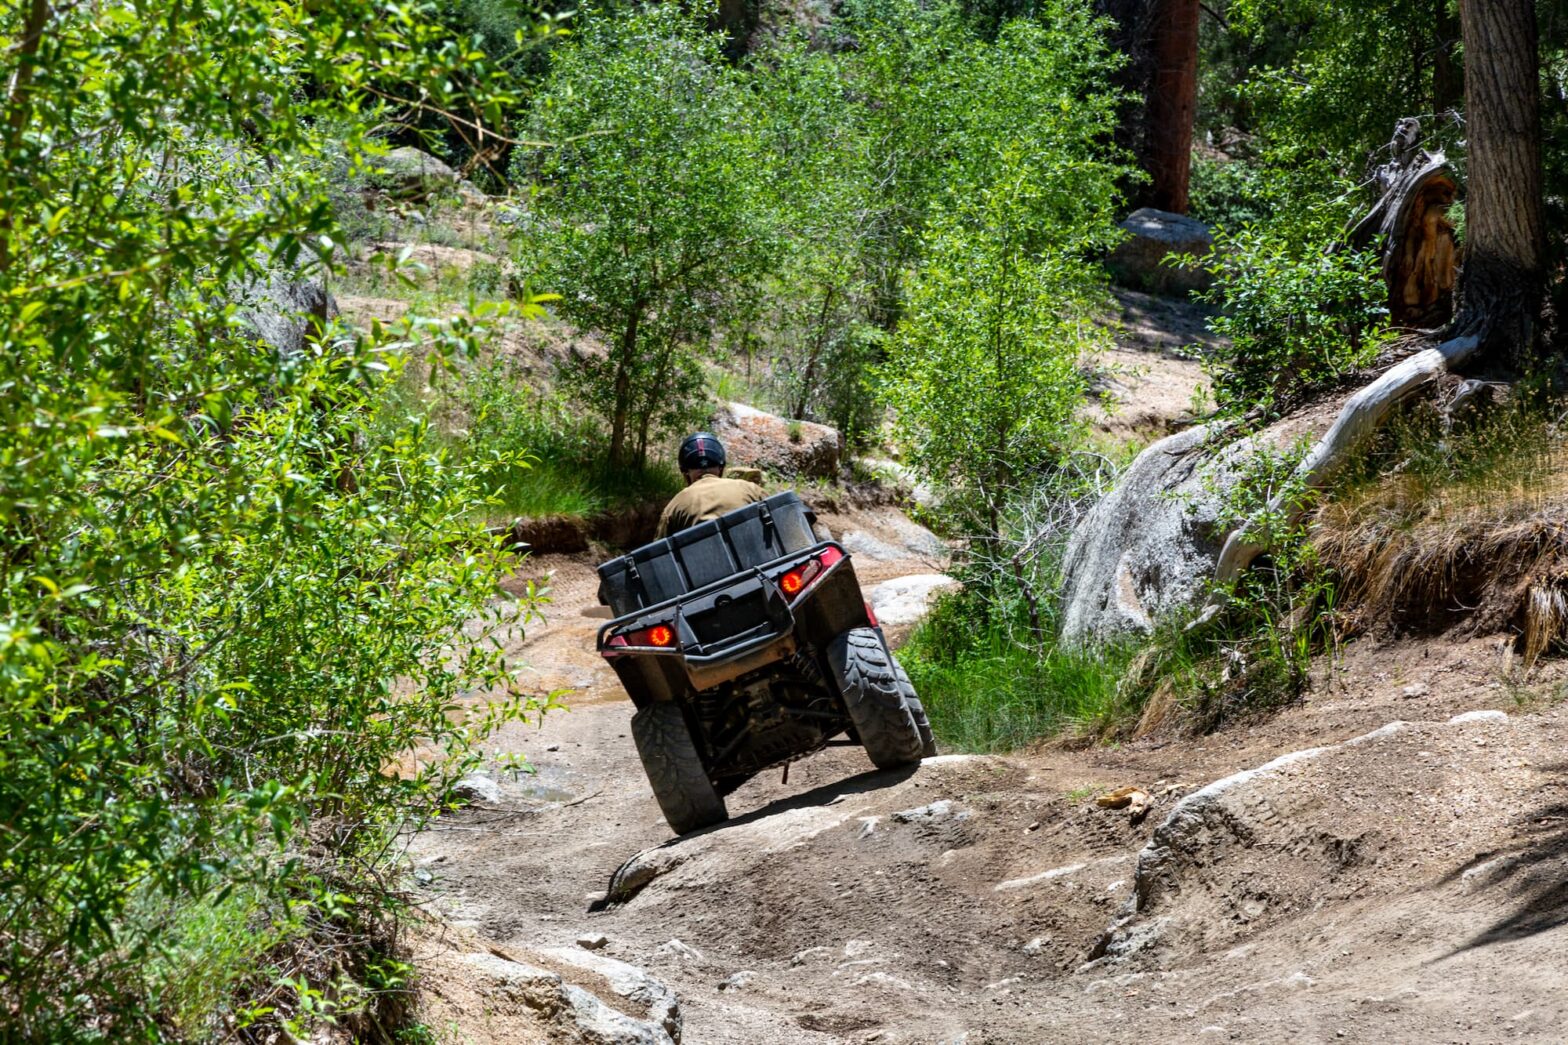 an ATV riding on a bumpy terrain in the forest